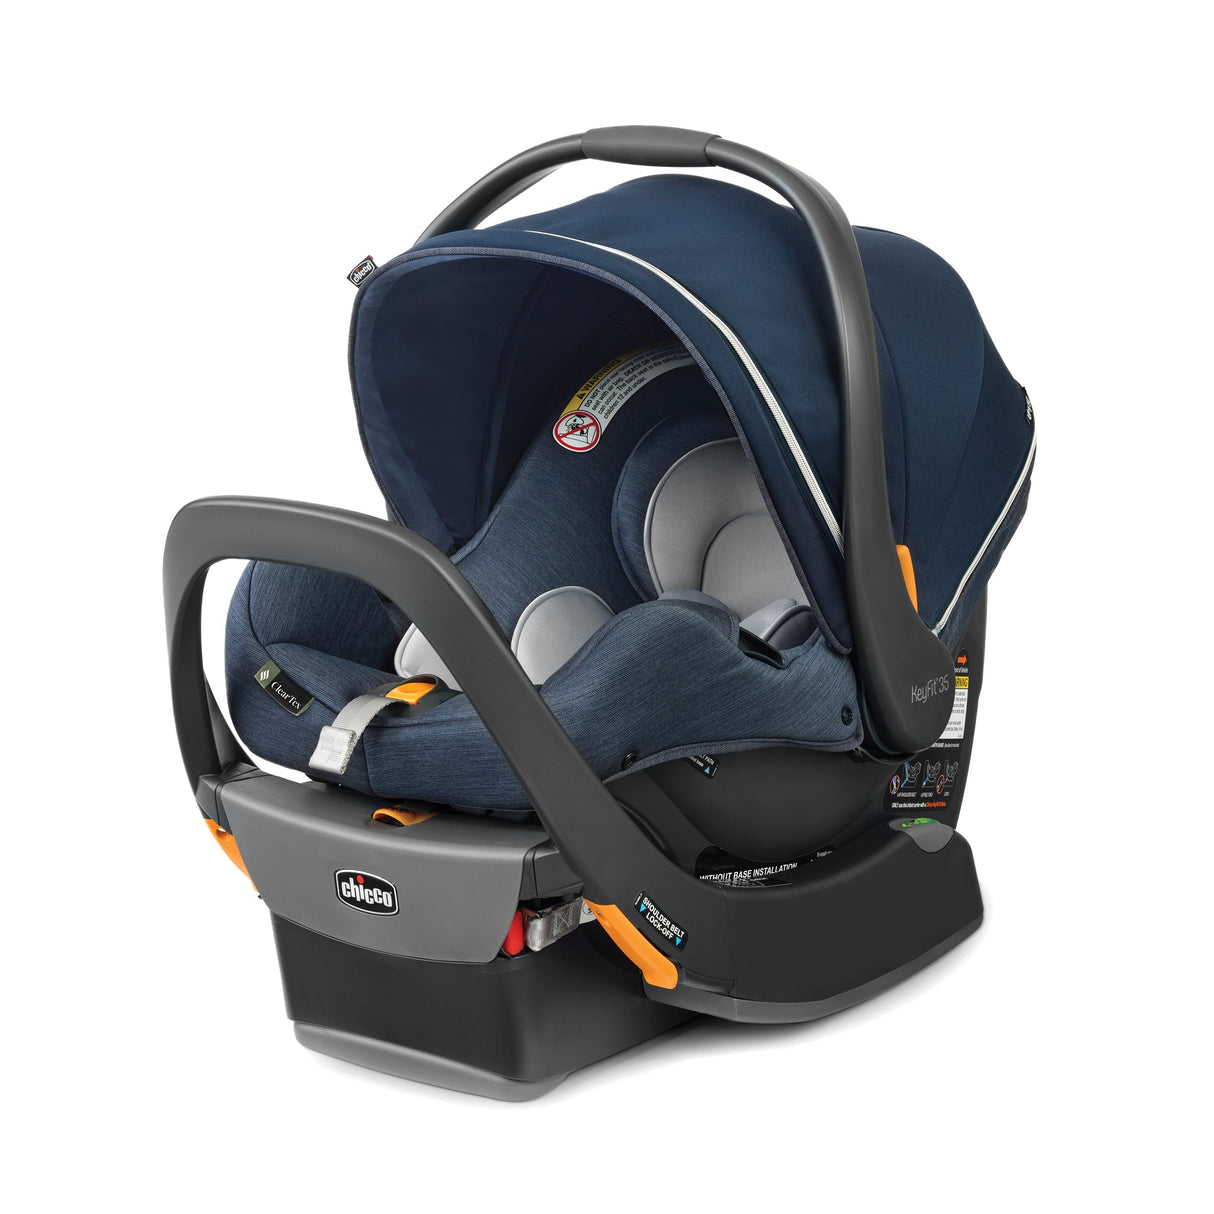 KeyFit 35 Zip ClearTex Infant Car Seat - Reef by MamasUncut Store